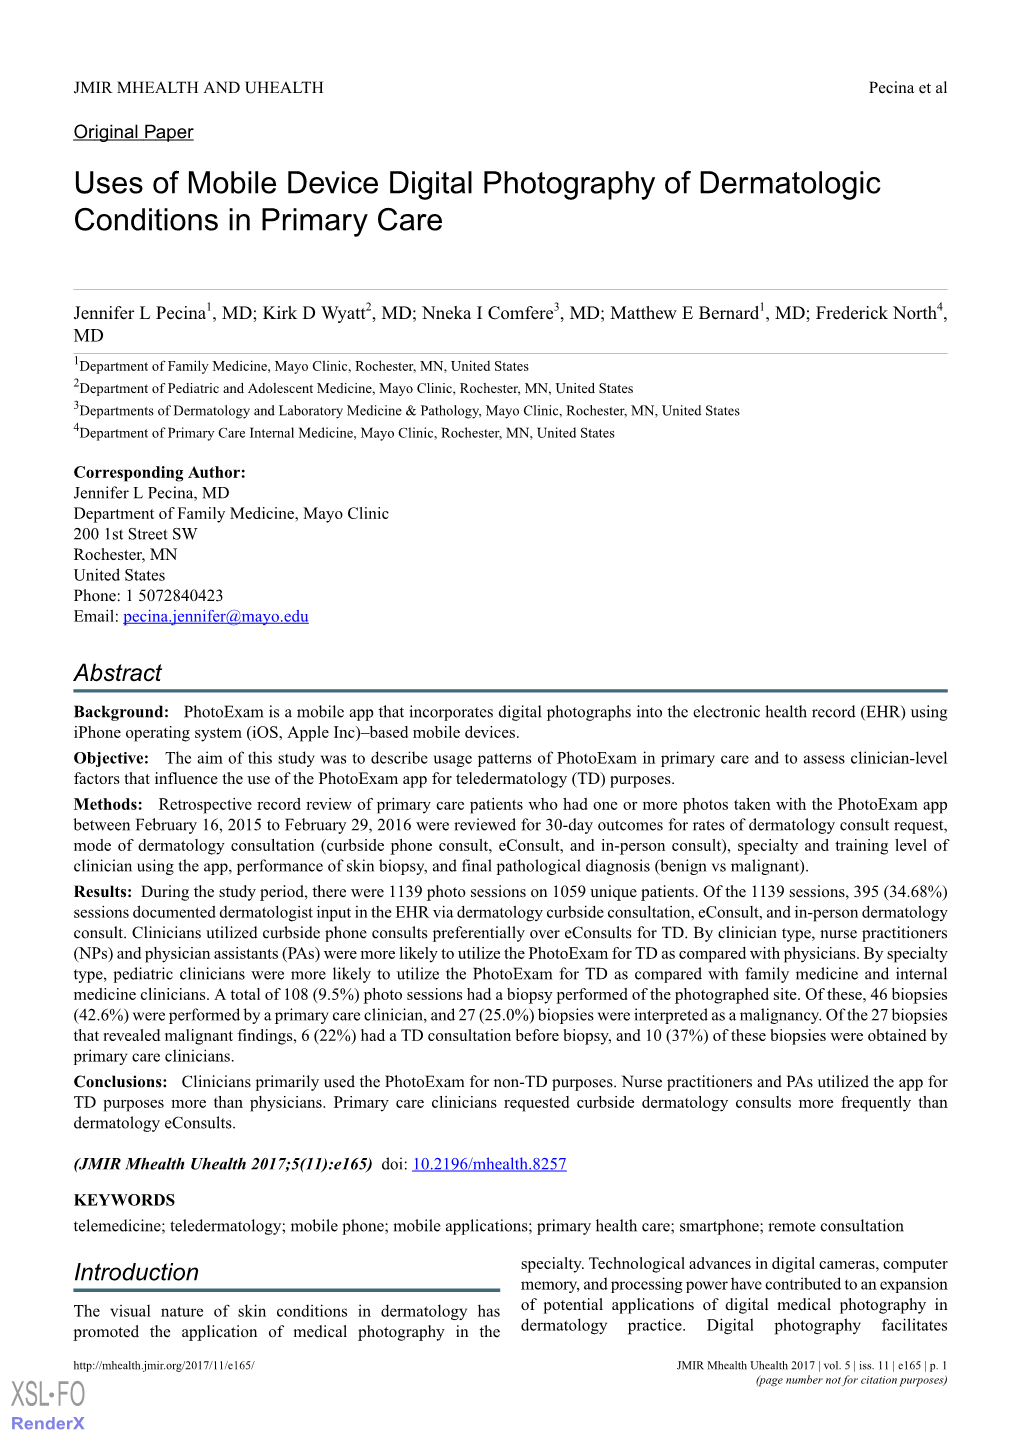 Uses of Mobile Device Digital Photography of Dermatologic Conditions in Primary Care